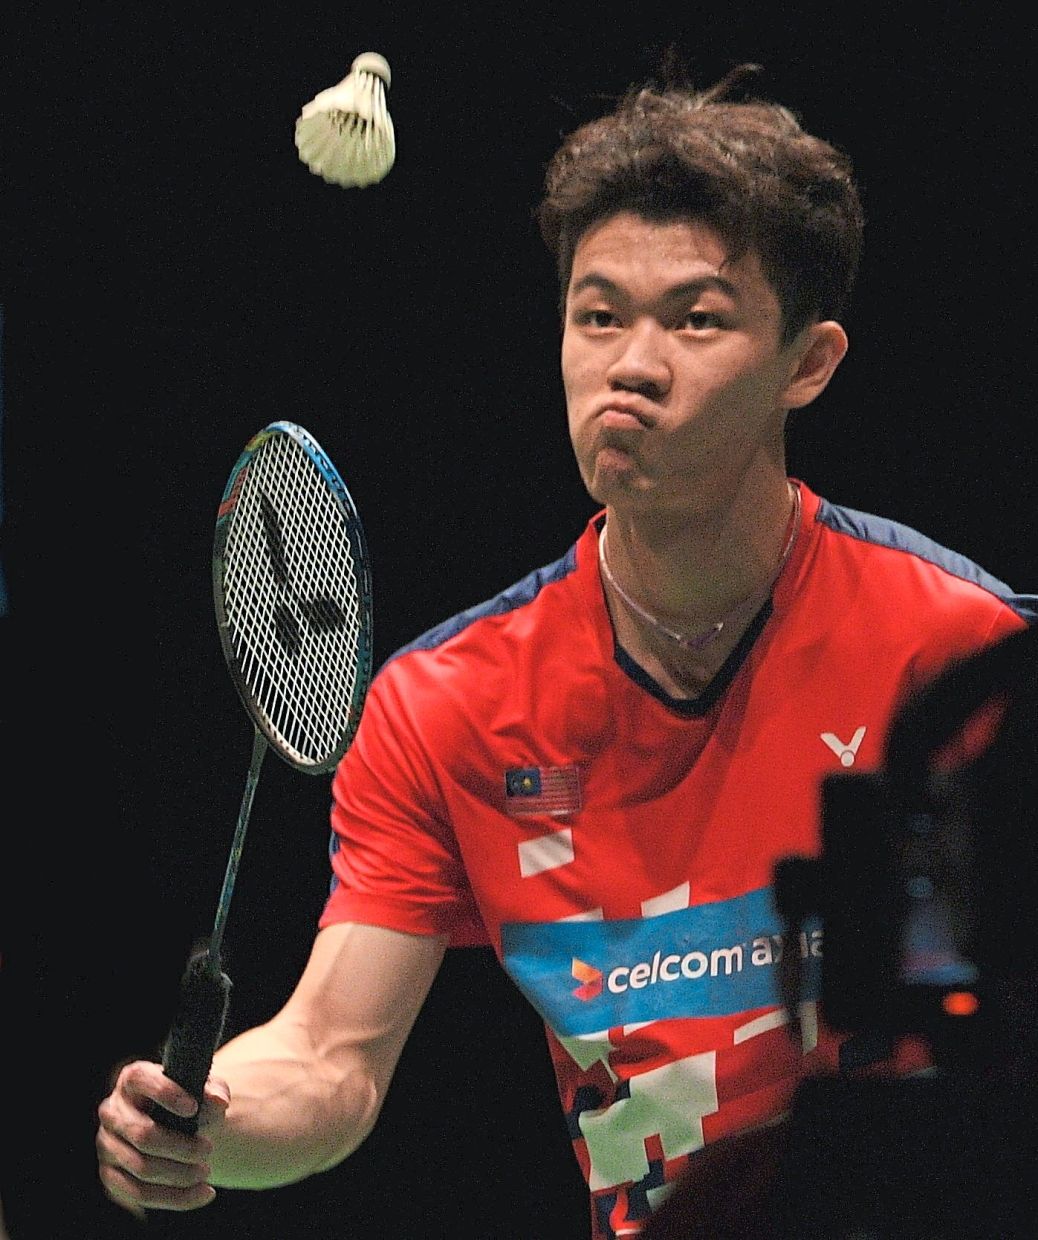 Badminton: Mixed Draw Makes It Tough For Zii Jia In Back To Back Meets